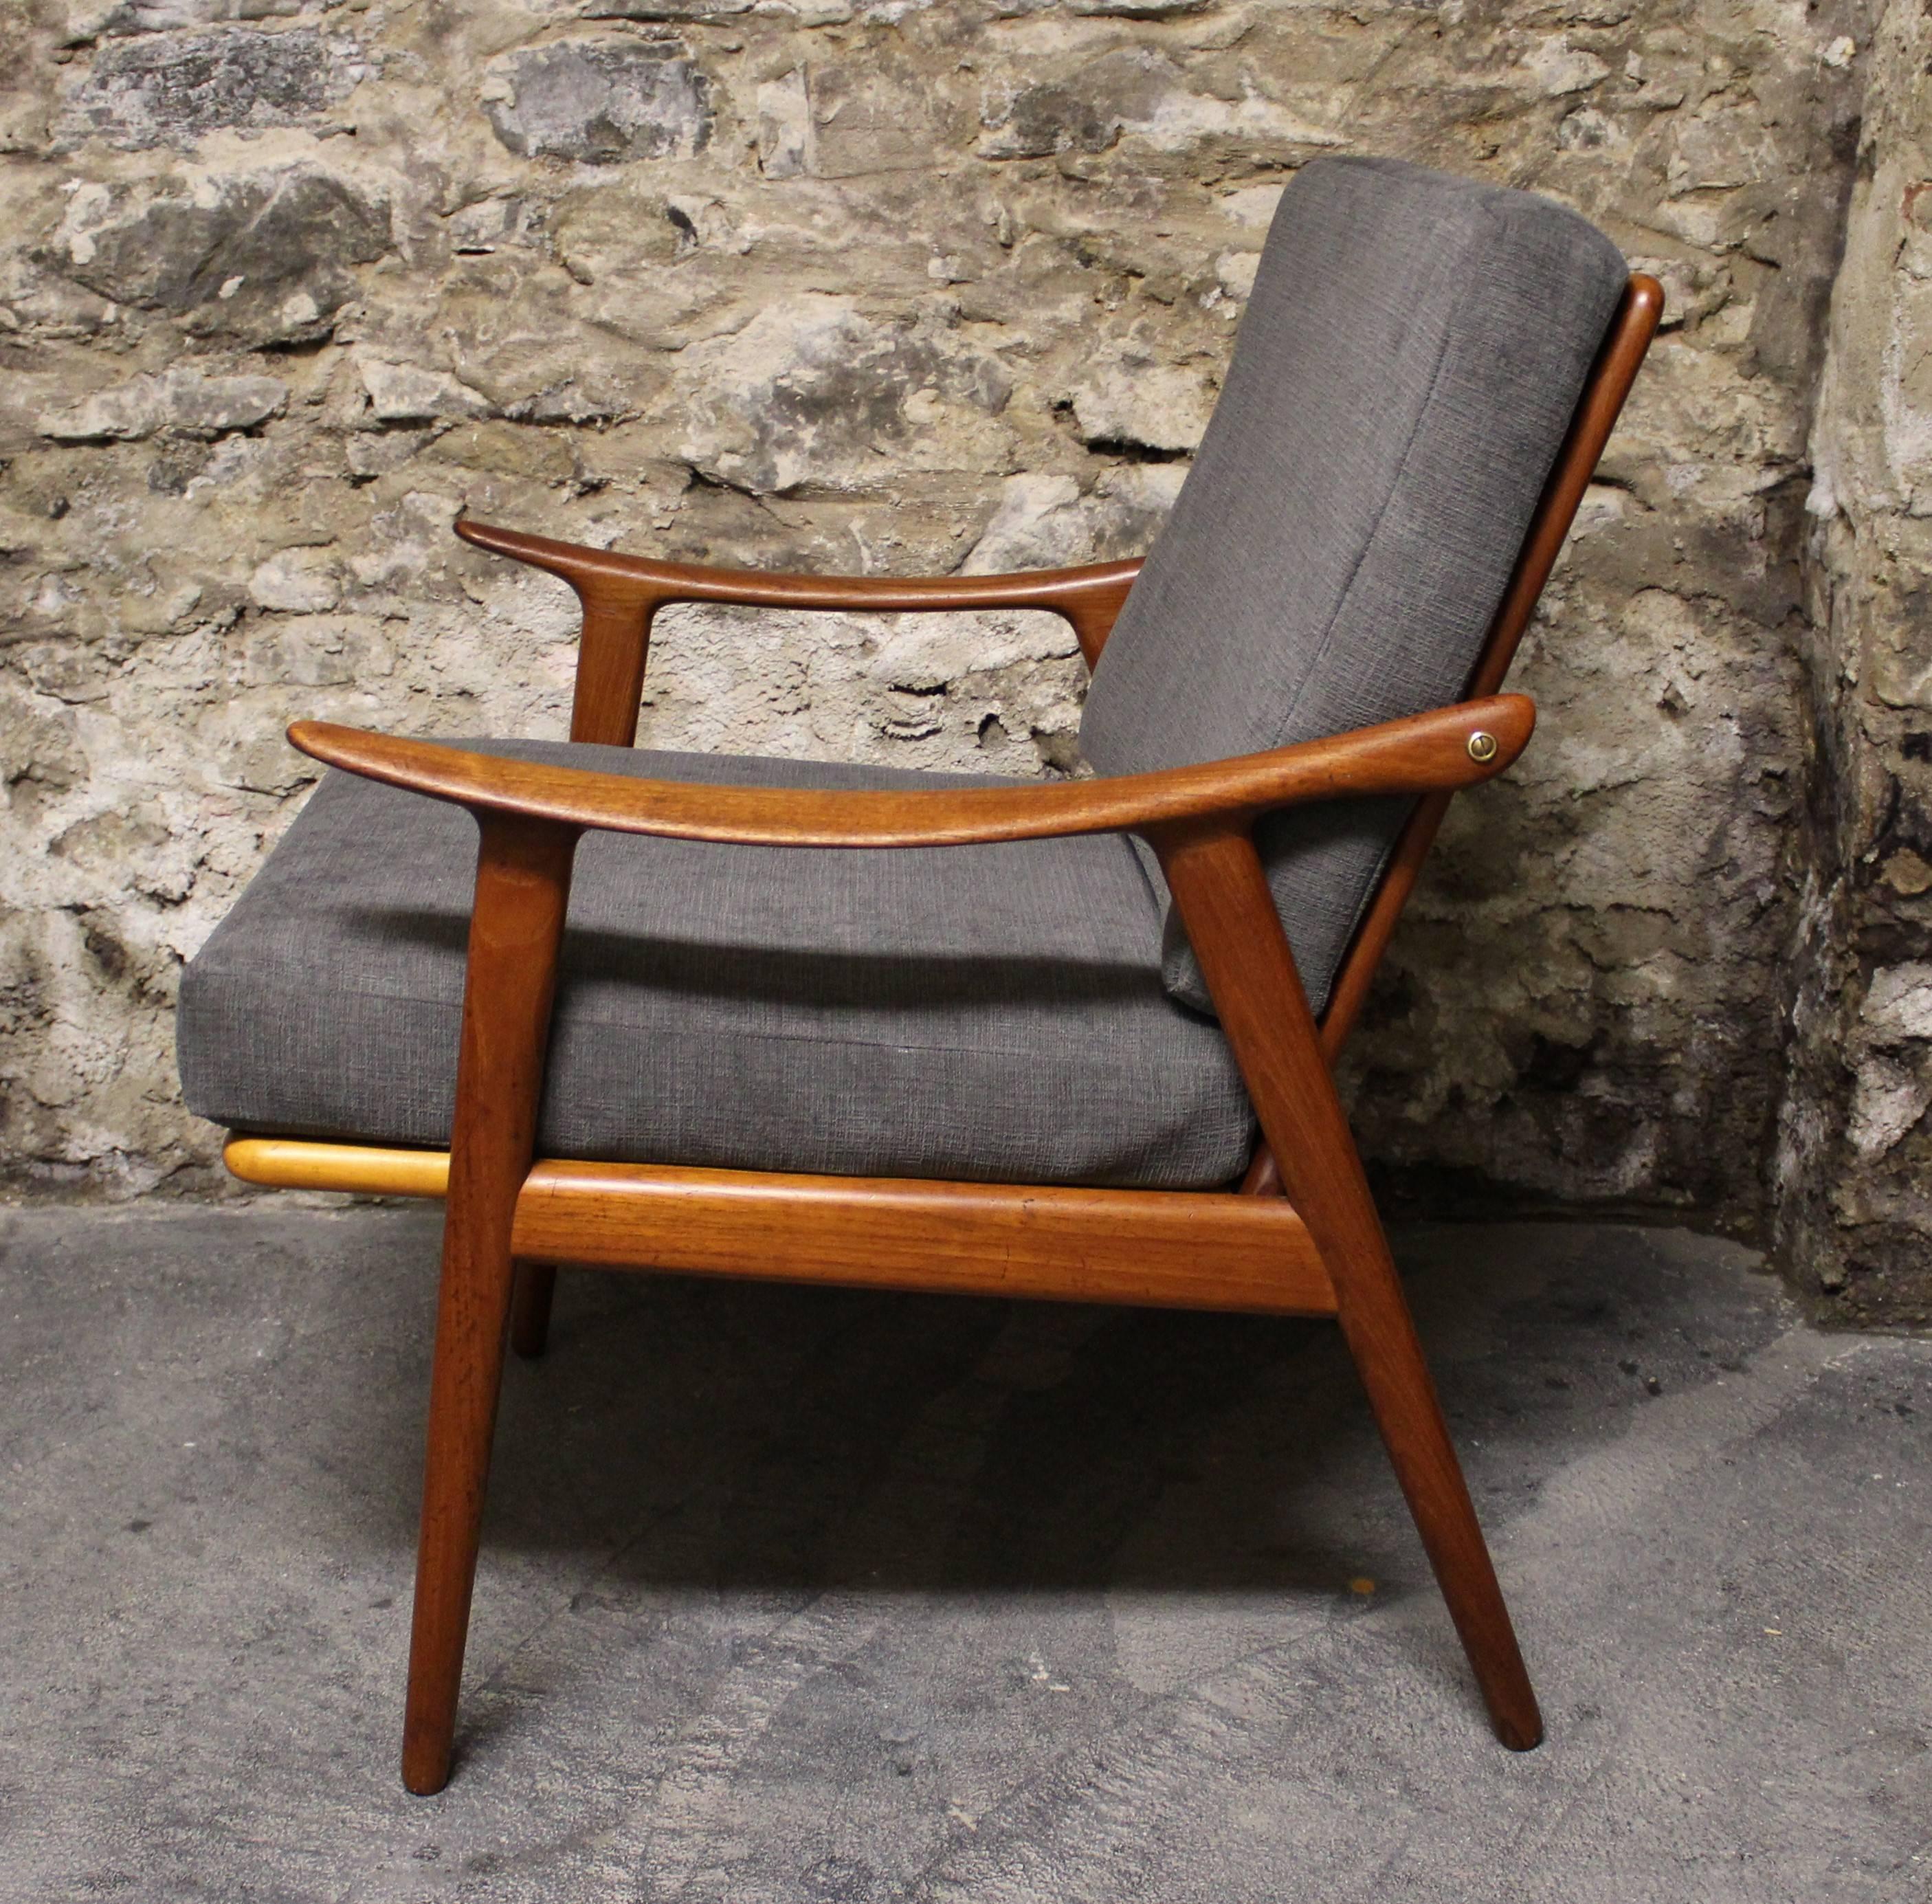 This easy chair was designed by Fredrik A. Kayser in the 1950s and manufactured by Vatne Lenestolfabrikk in Norway. The frame is made from solid teak and features organically formed armrests. It has been re-upholstered in a slate grey fabric. The